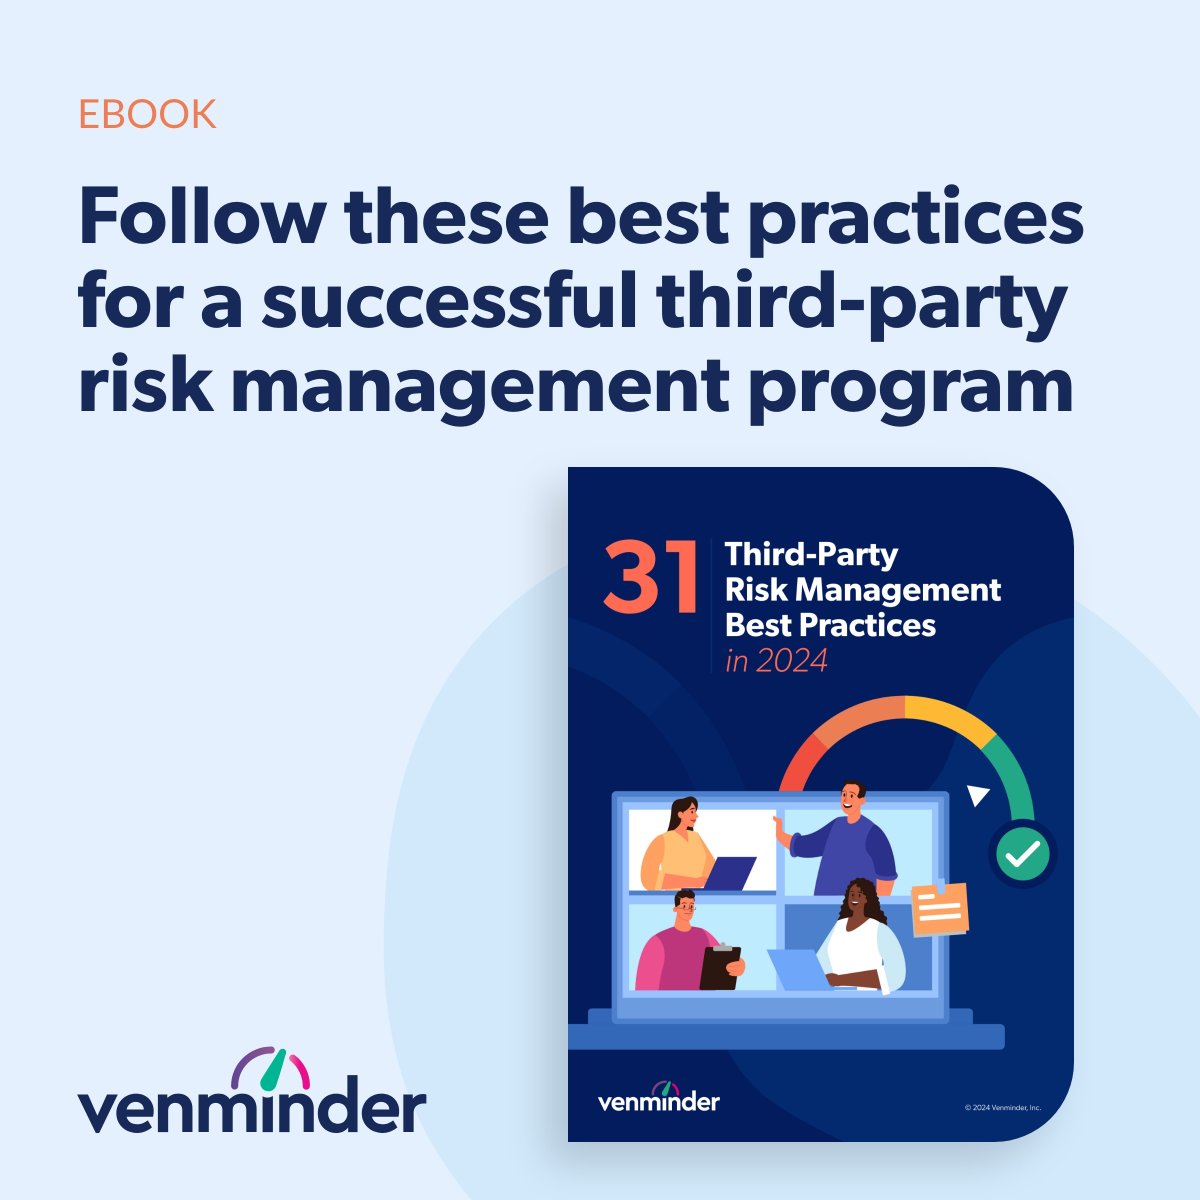 As a third-party risk professional, you probably like to stay up to date on the latest best practices to ensure your program is running smoothly. In this eBook, learn 31 #TPRM best practices for 2024: hubs.ly/Q02x4Wg70 #vendormanagement #thirdpartyrisktrends #riskmanagement